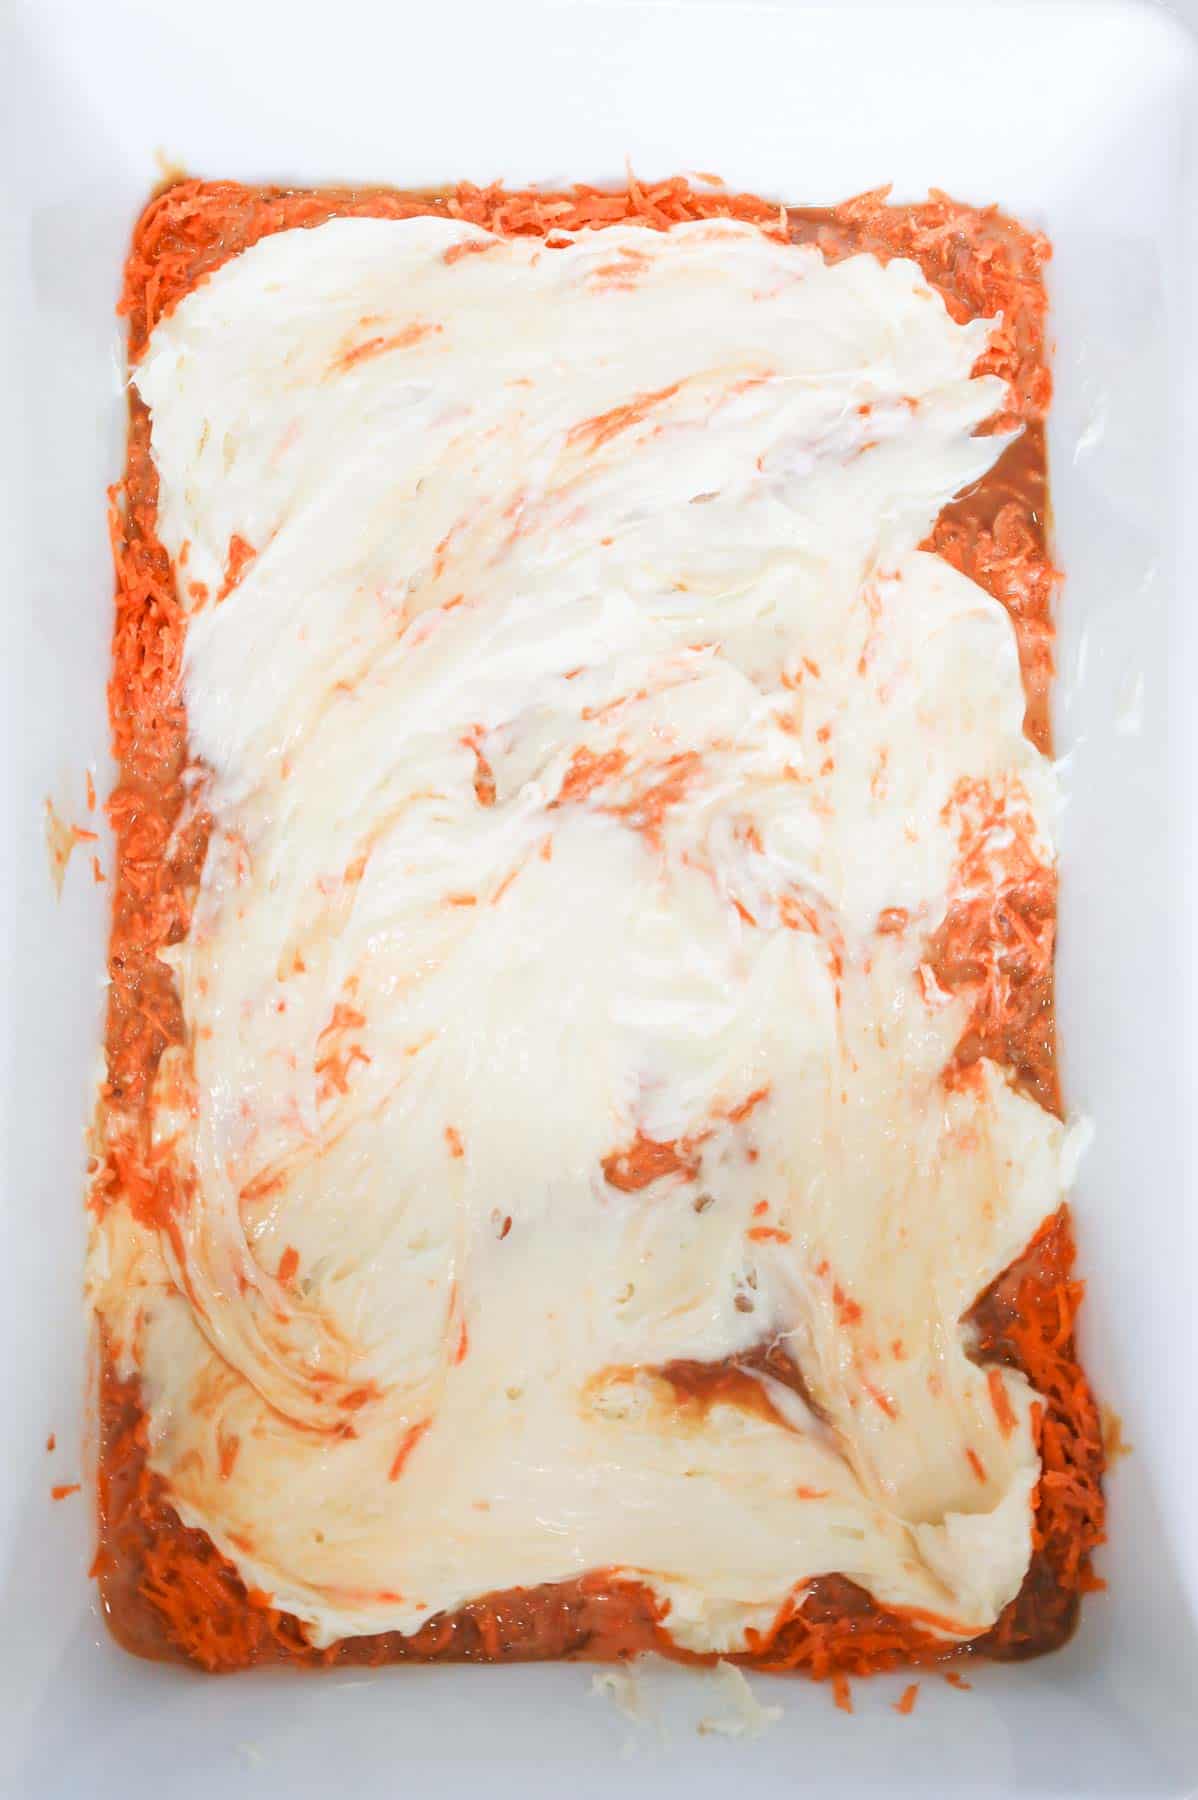 cream cheese frosting spread over grated carrot in a baking dish